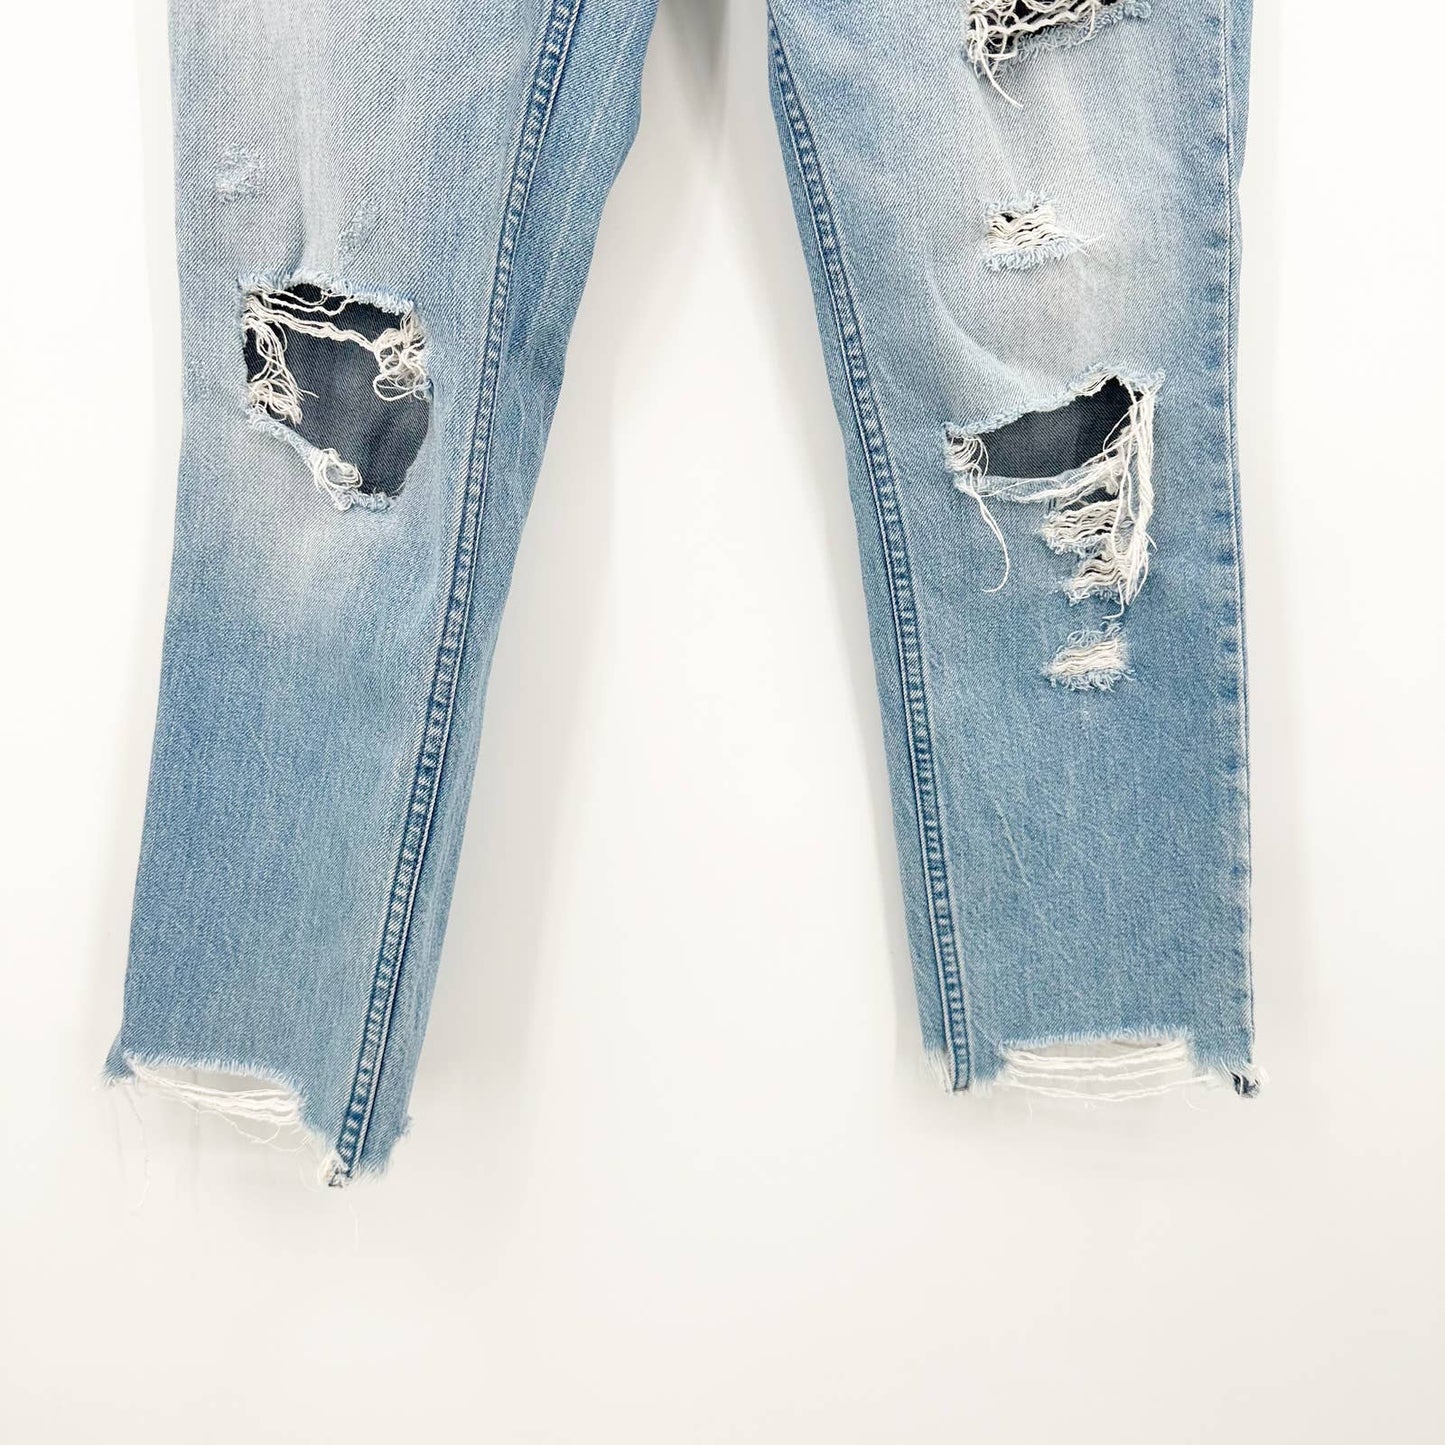 Abercrombie & Fitch Annie Girlfriend High Rise Distressed Jeans 2